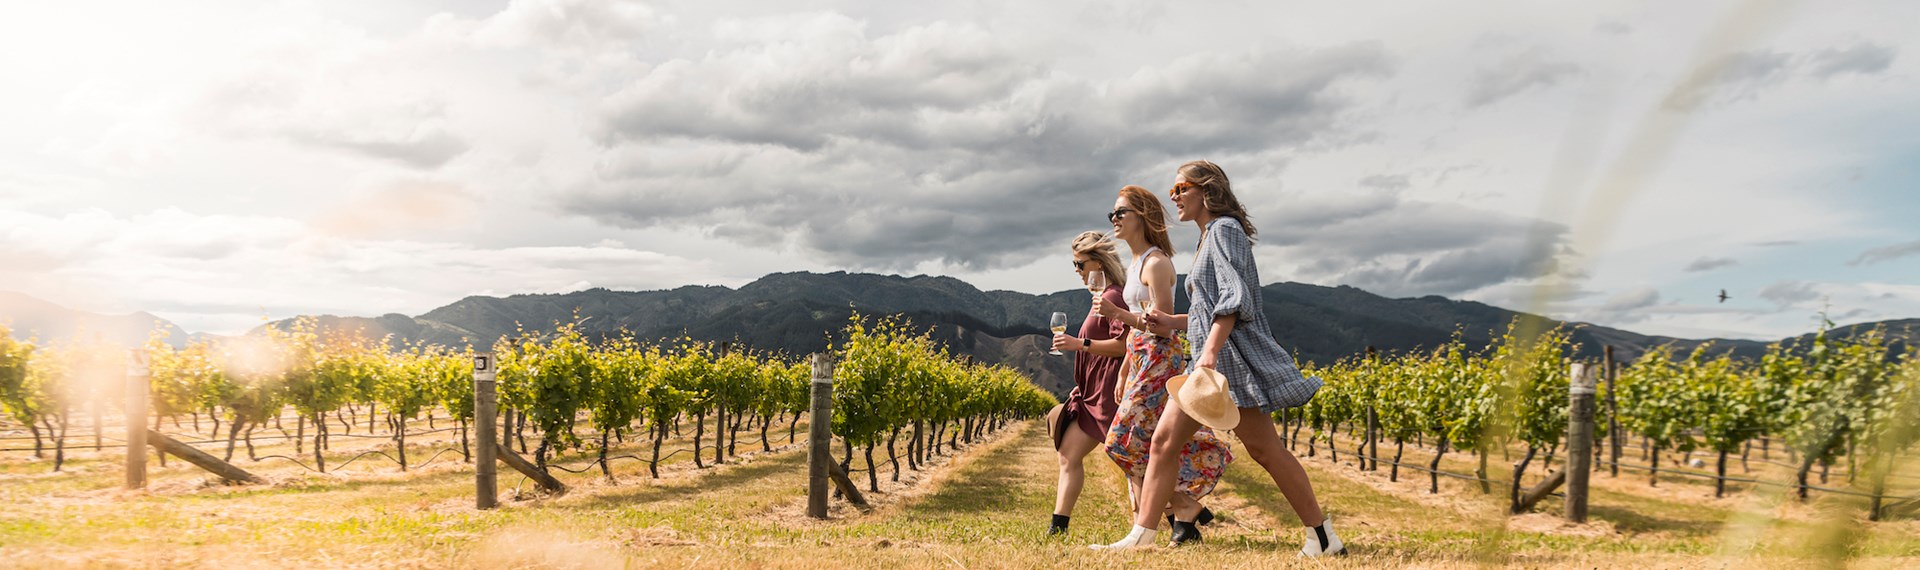 Three women walk through a vineyard with hills in the background as part of a wine tour in Marlborough near Blenheim, at the top of New Zealand's South Island